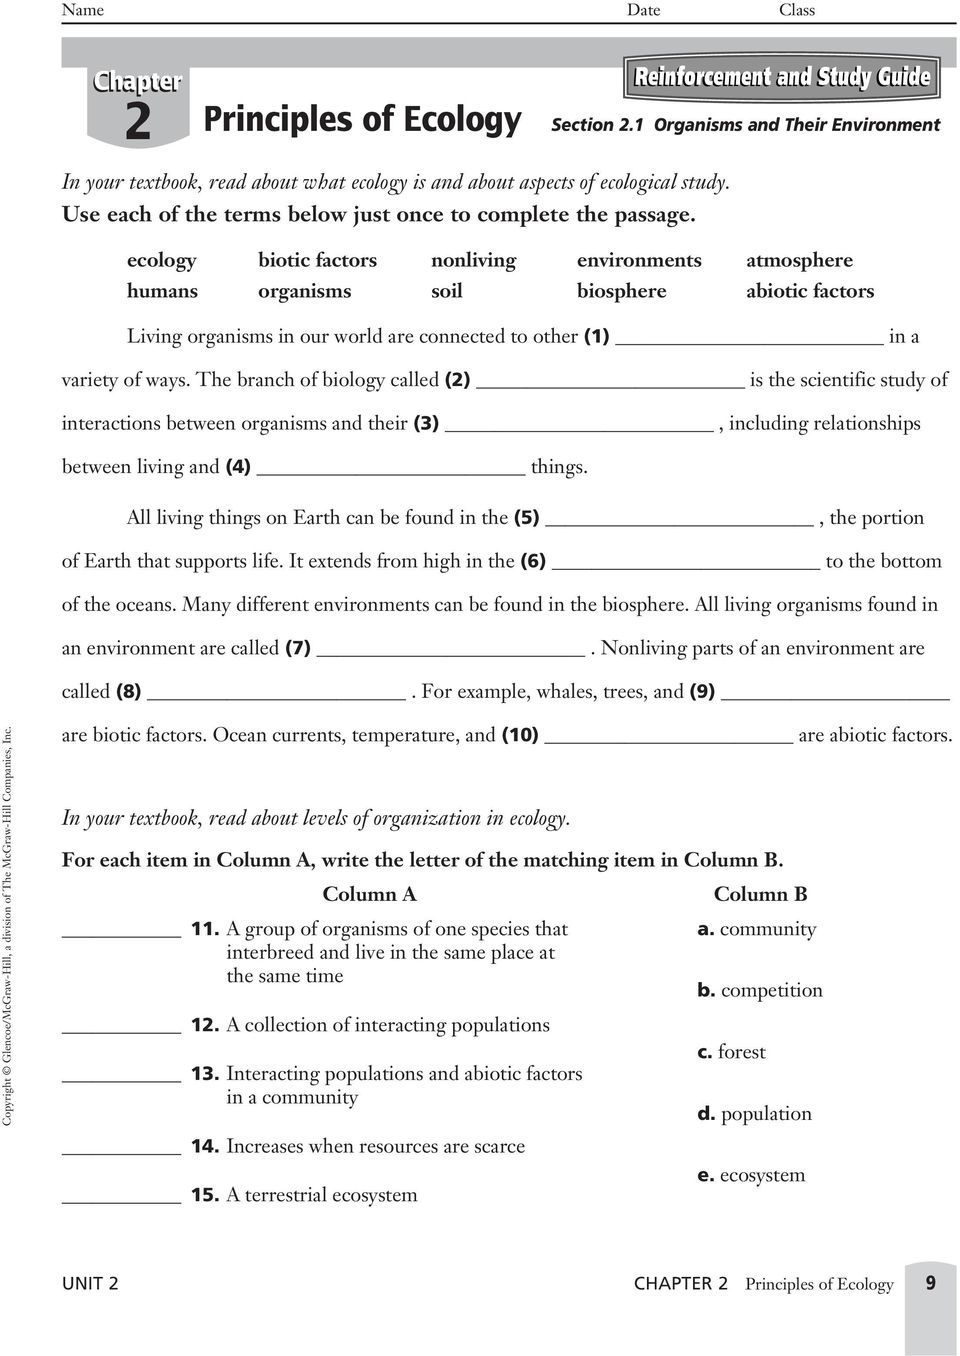 Unit 11 Resources Ecology - PDF Free Download Pertaining To Principles Of Ecology Worksheet Answers